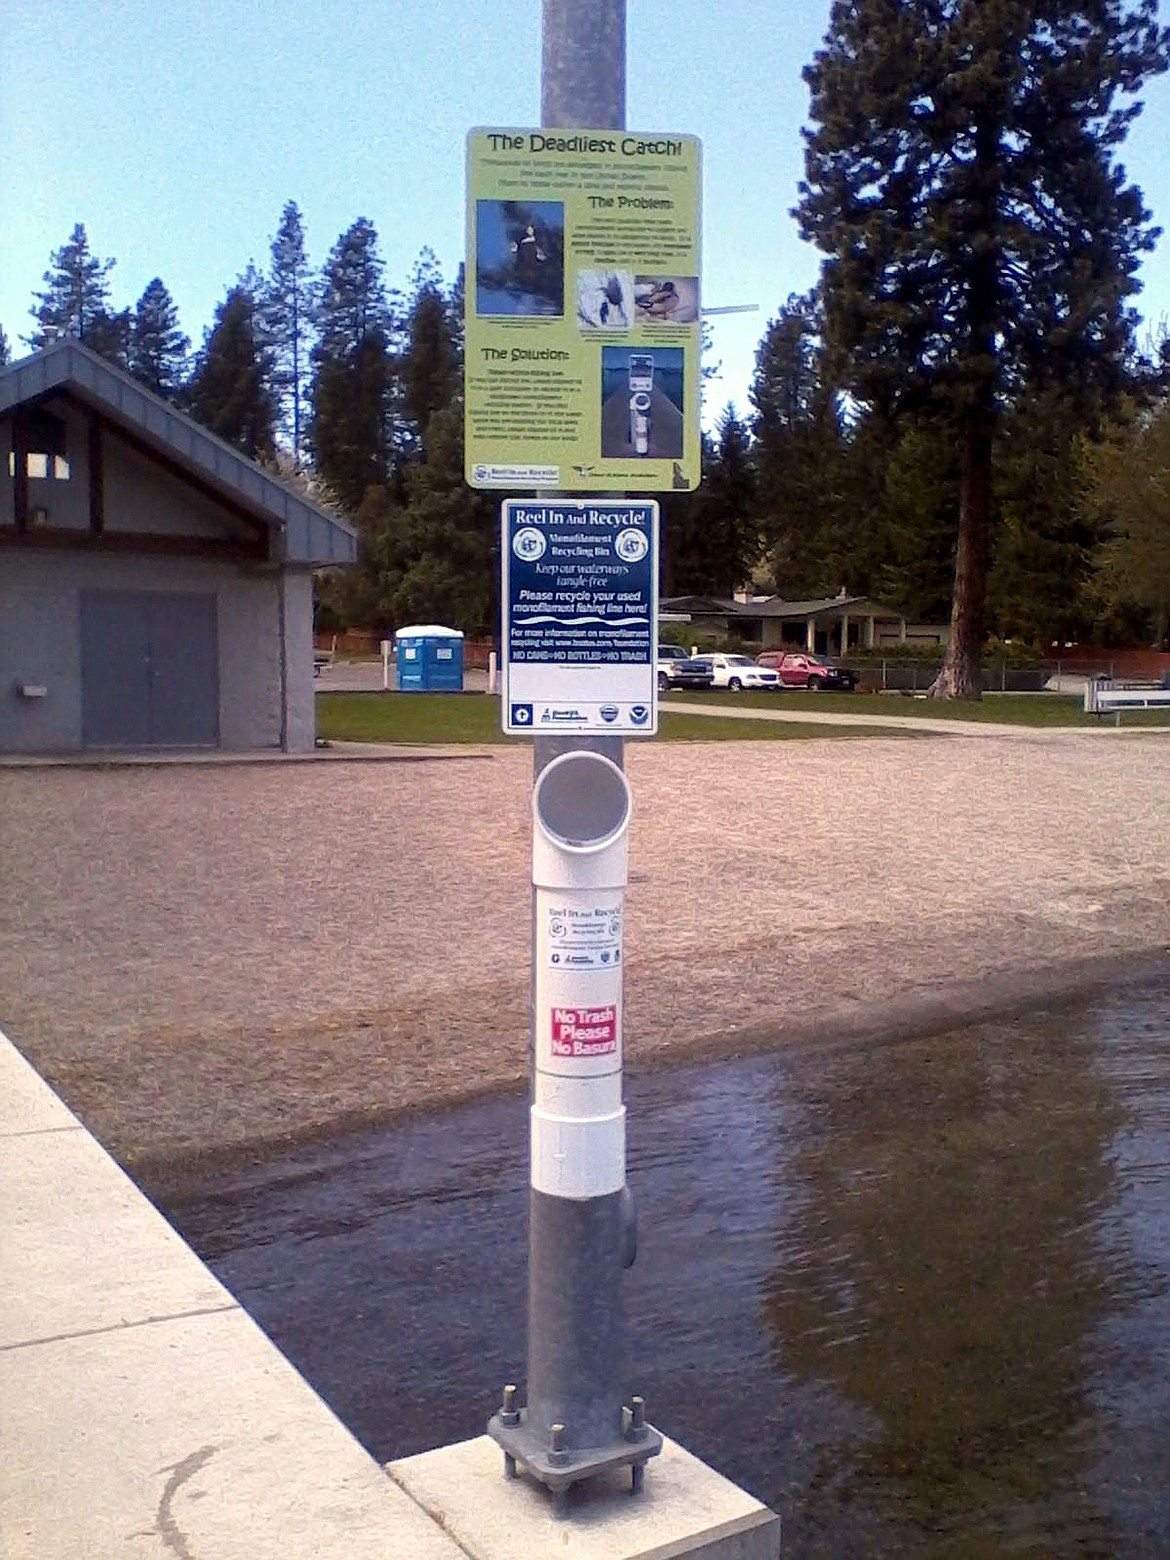 Courtesy photo
A fishing line recycling bin awaits anglers at Honeysuckle Beach in Hayden. The bin was installed and is monitored by members of CDA Audubon.